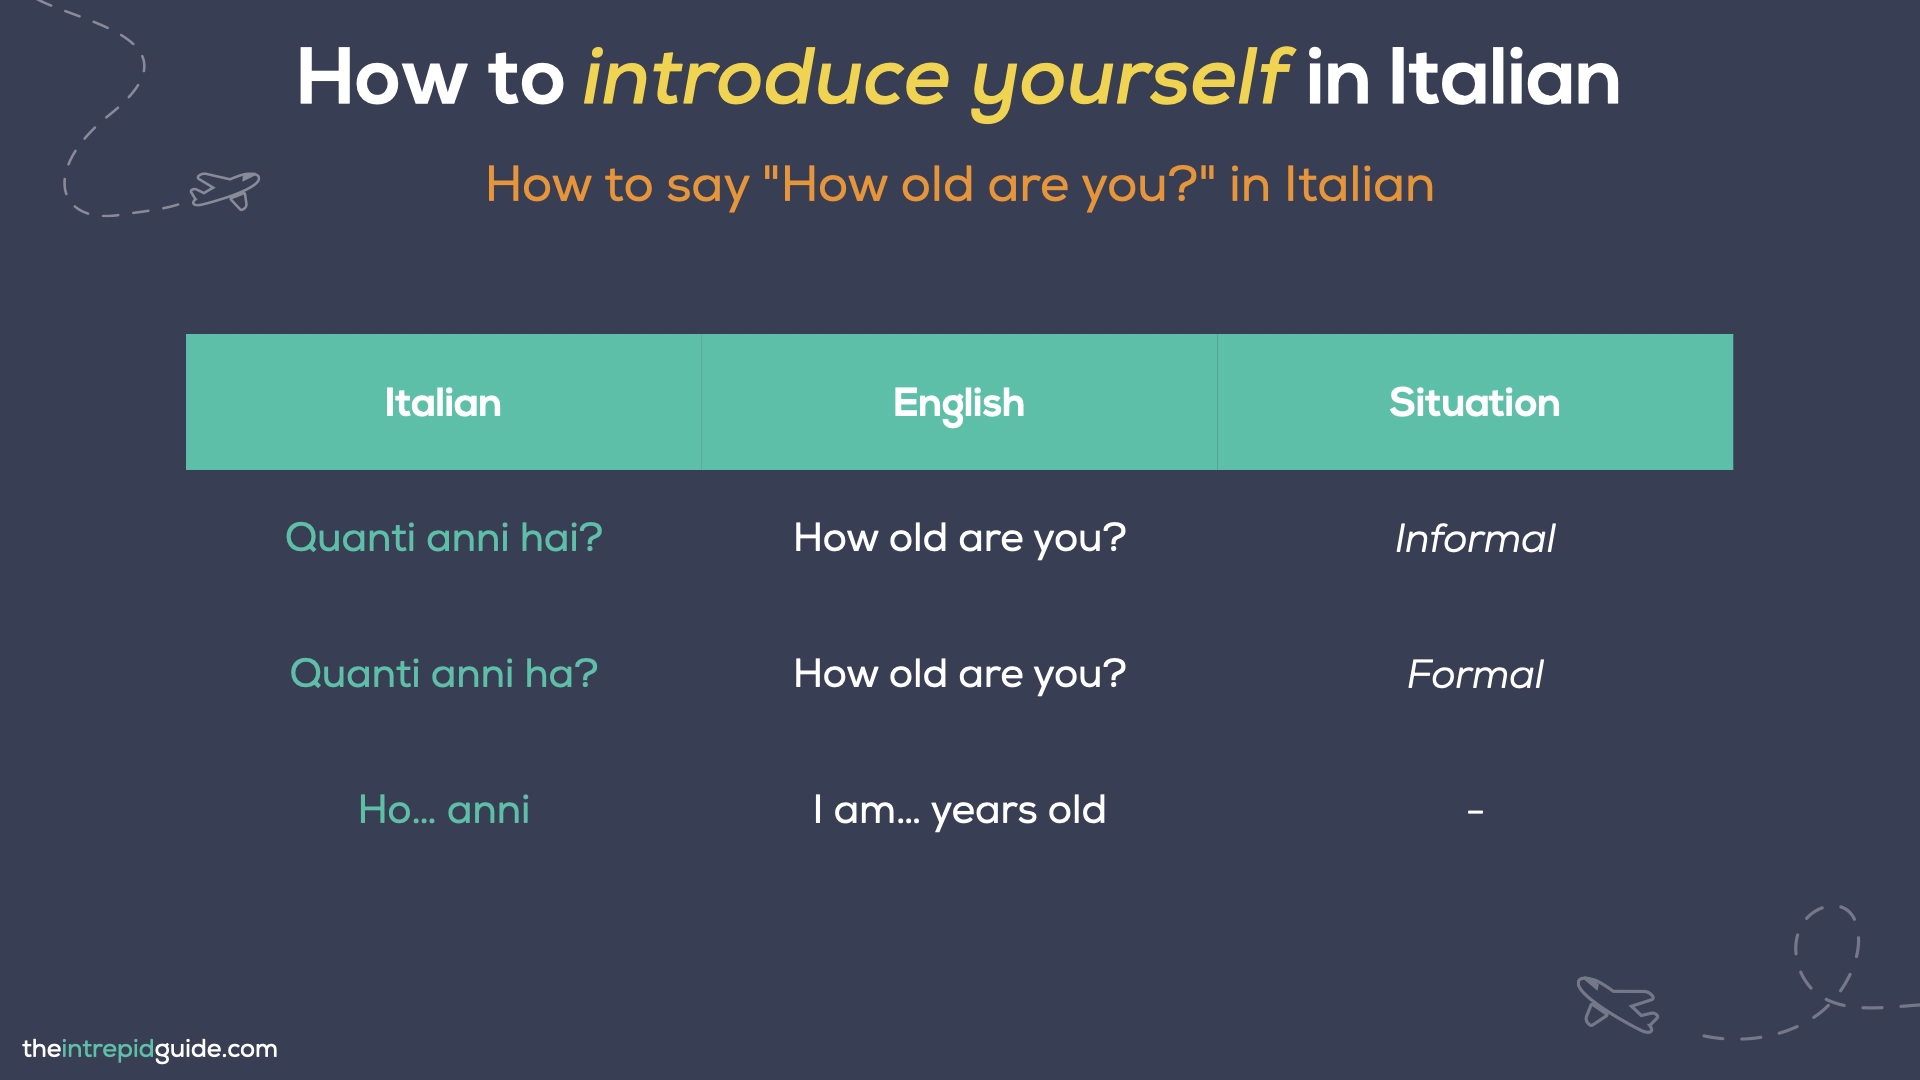 How to introduce yourself in Italian - How to say How old are you in Italian